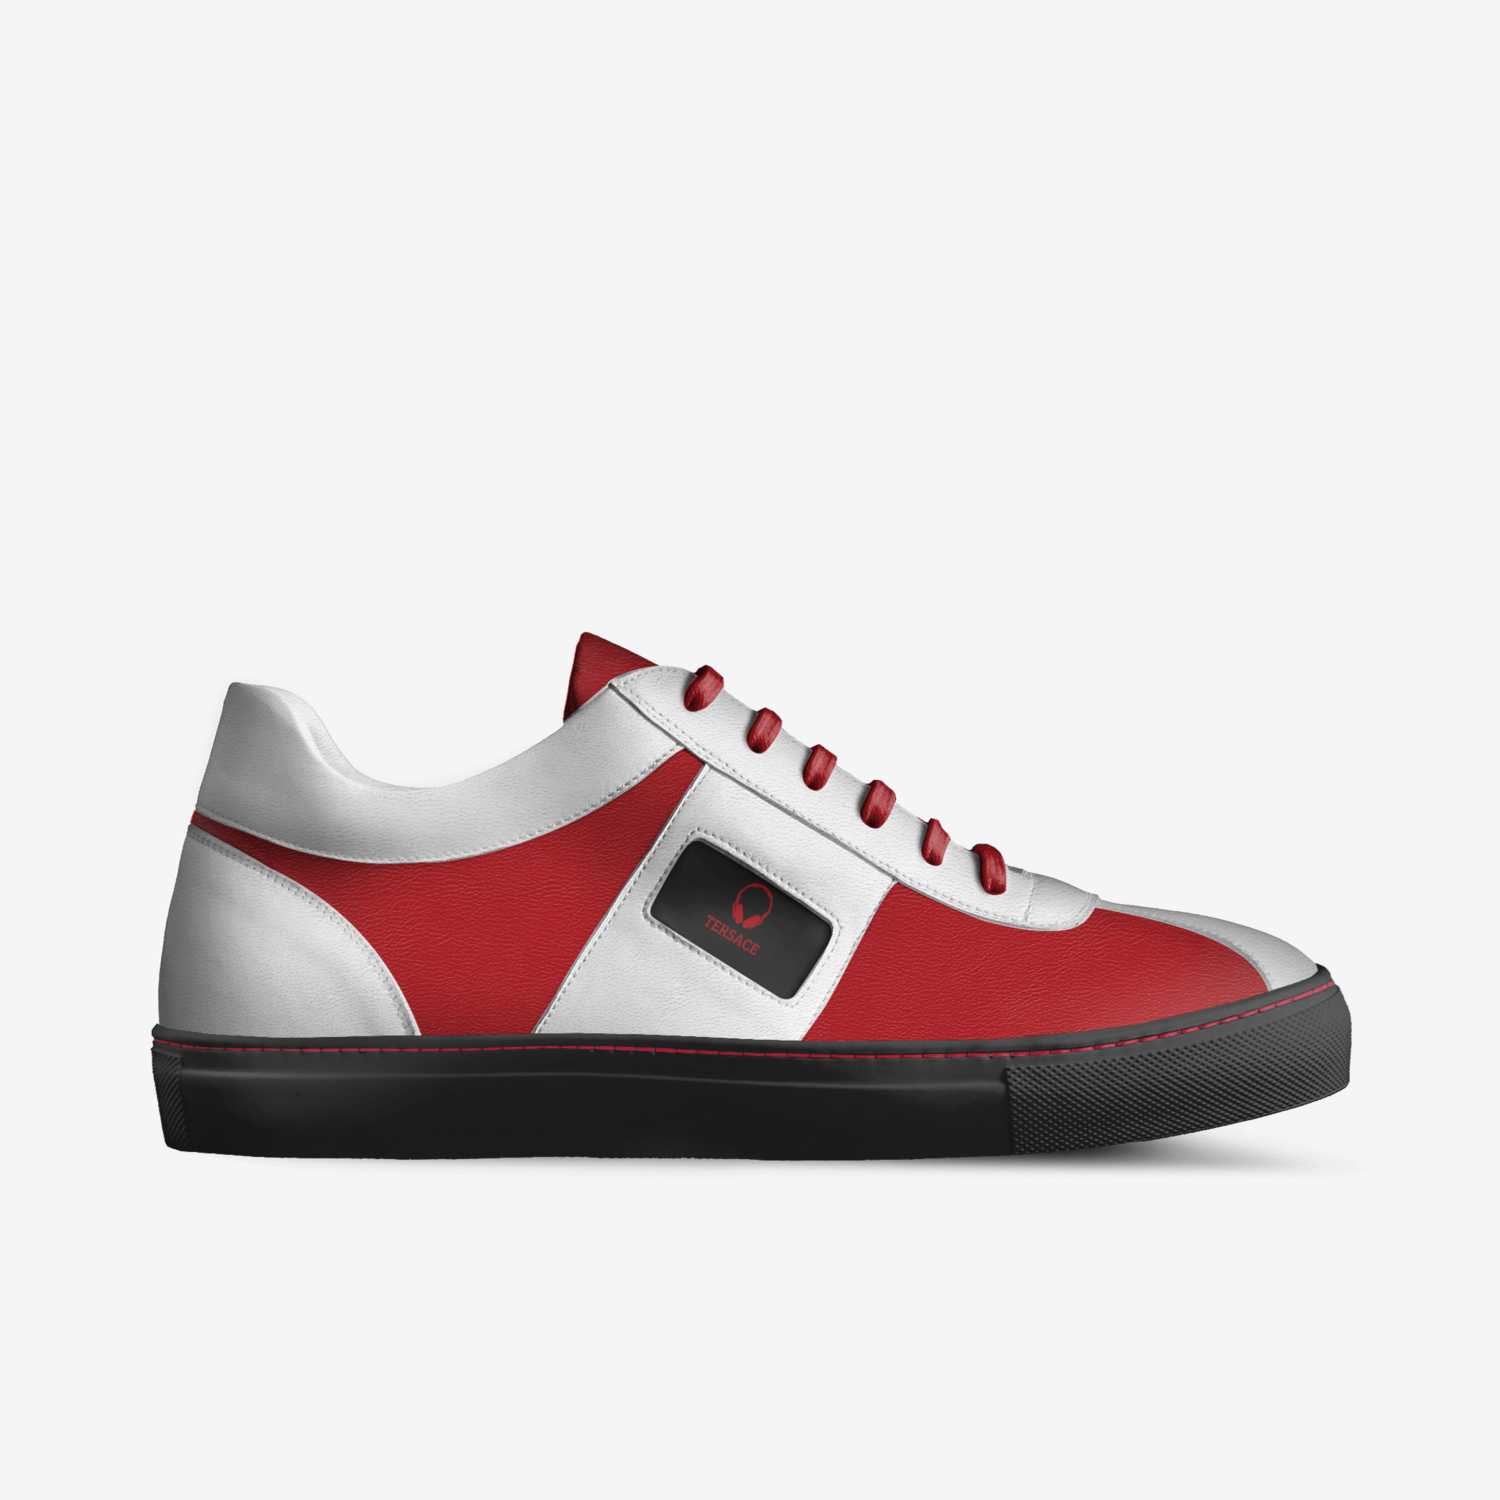 TerSace | A Custom Shoe concept by Tyrese Payeton